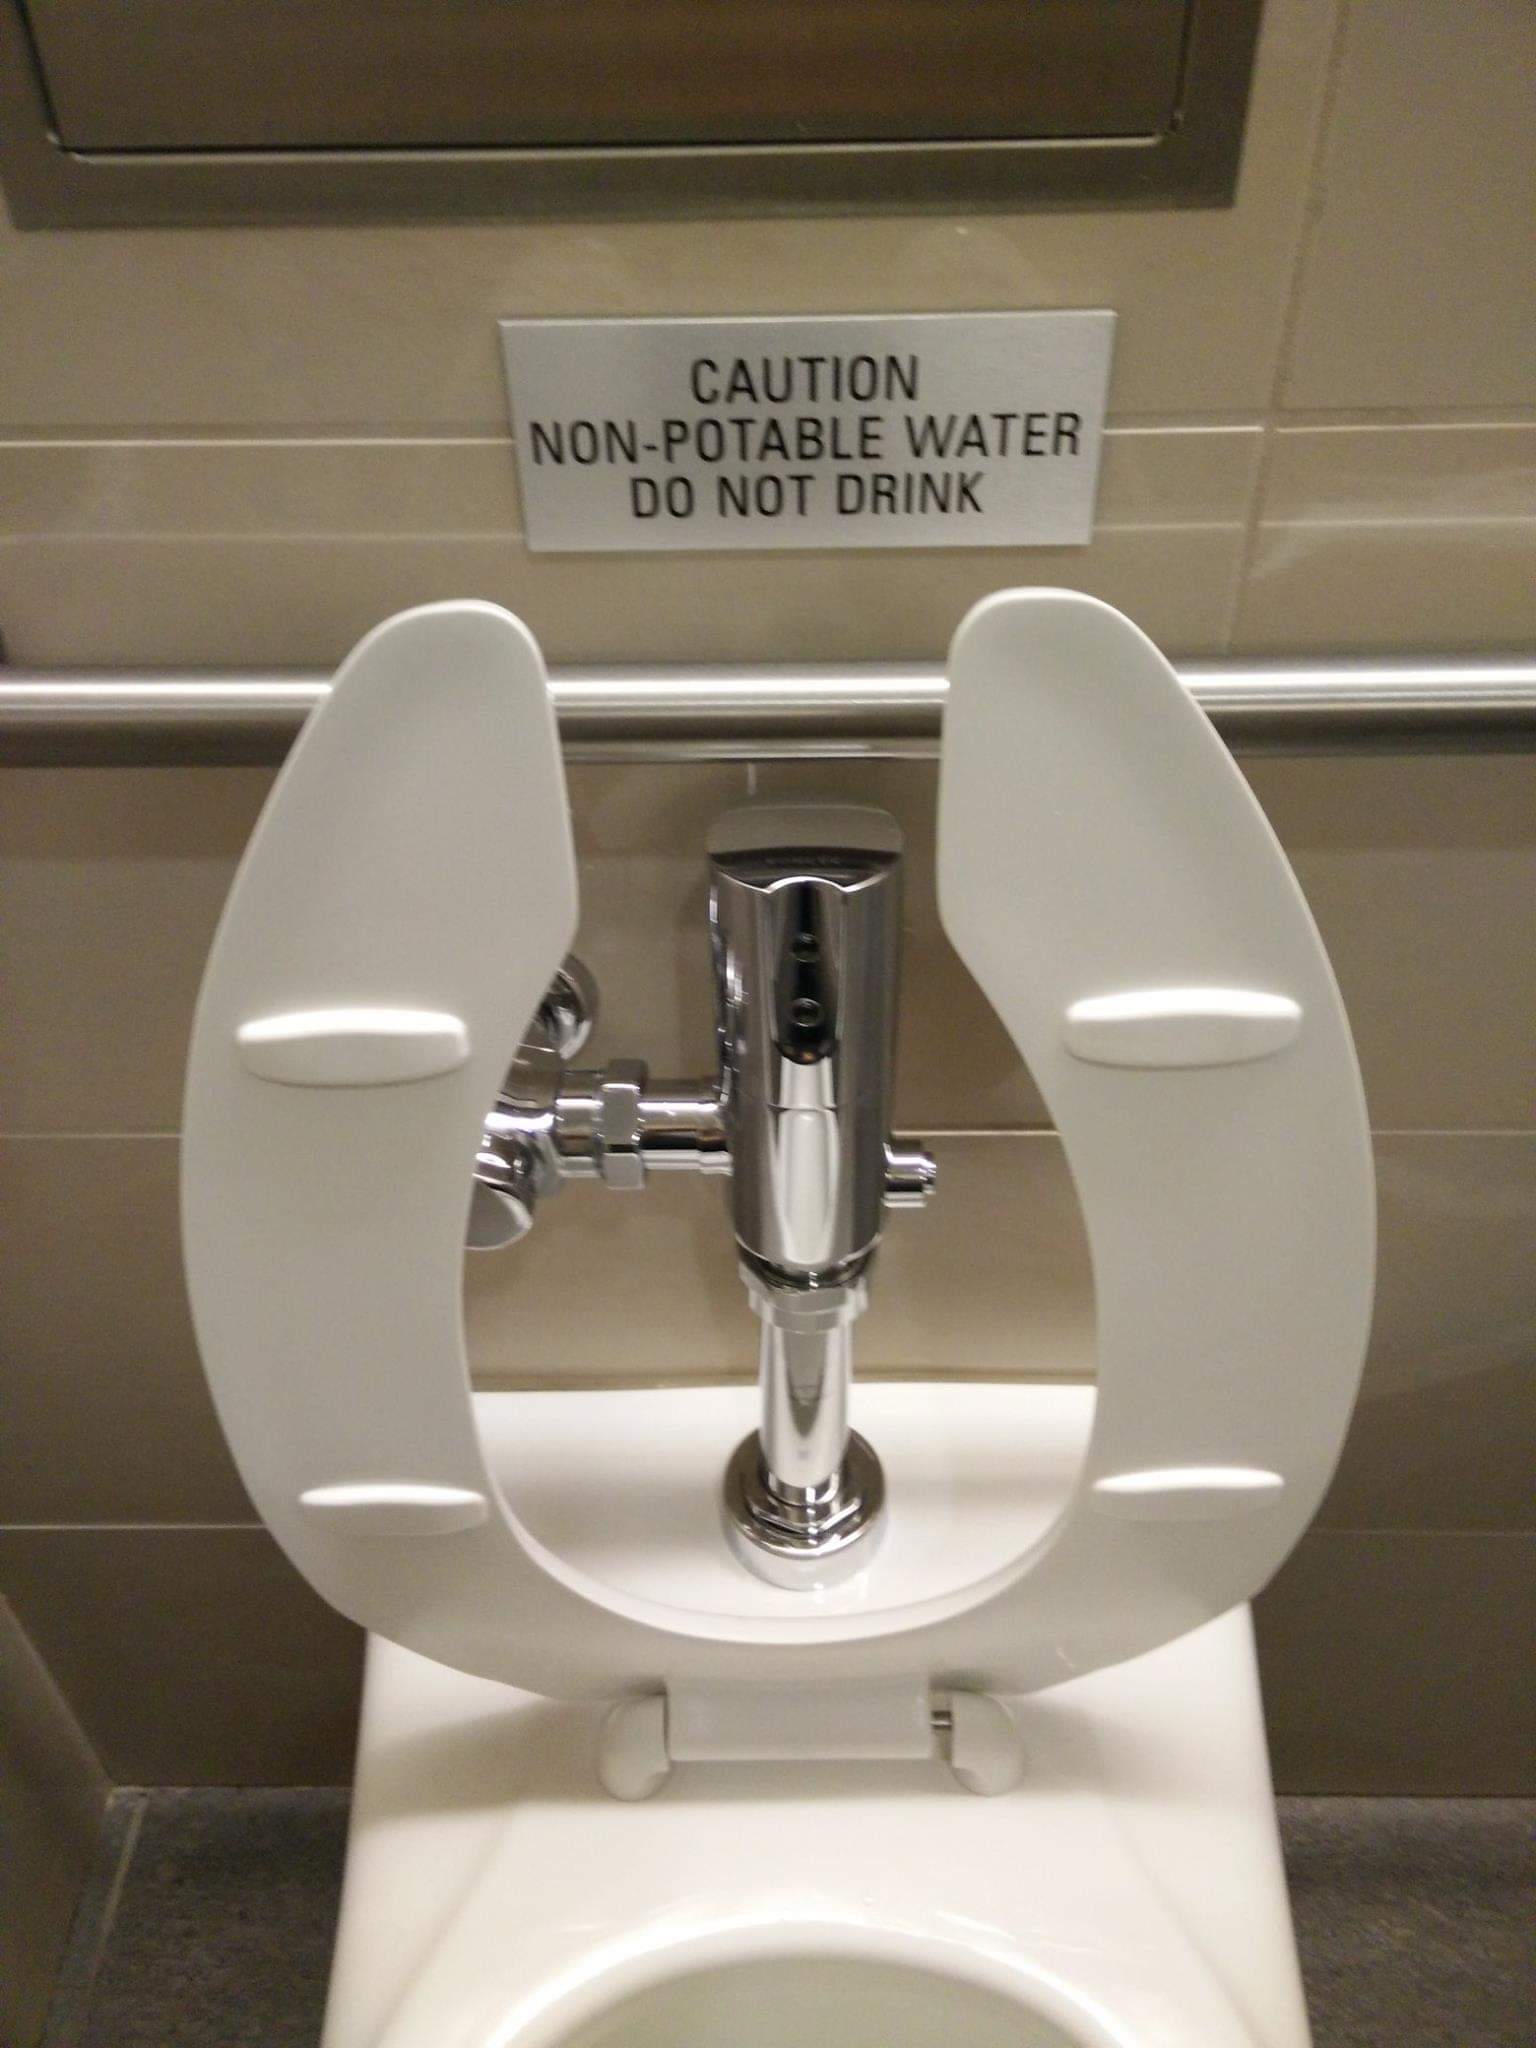 tap - Caution NonPotable Water Do Not Drink